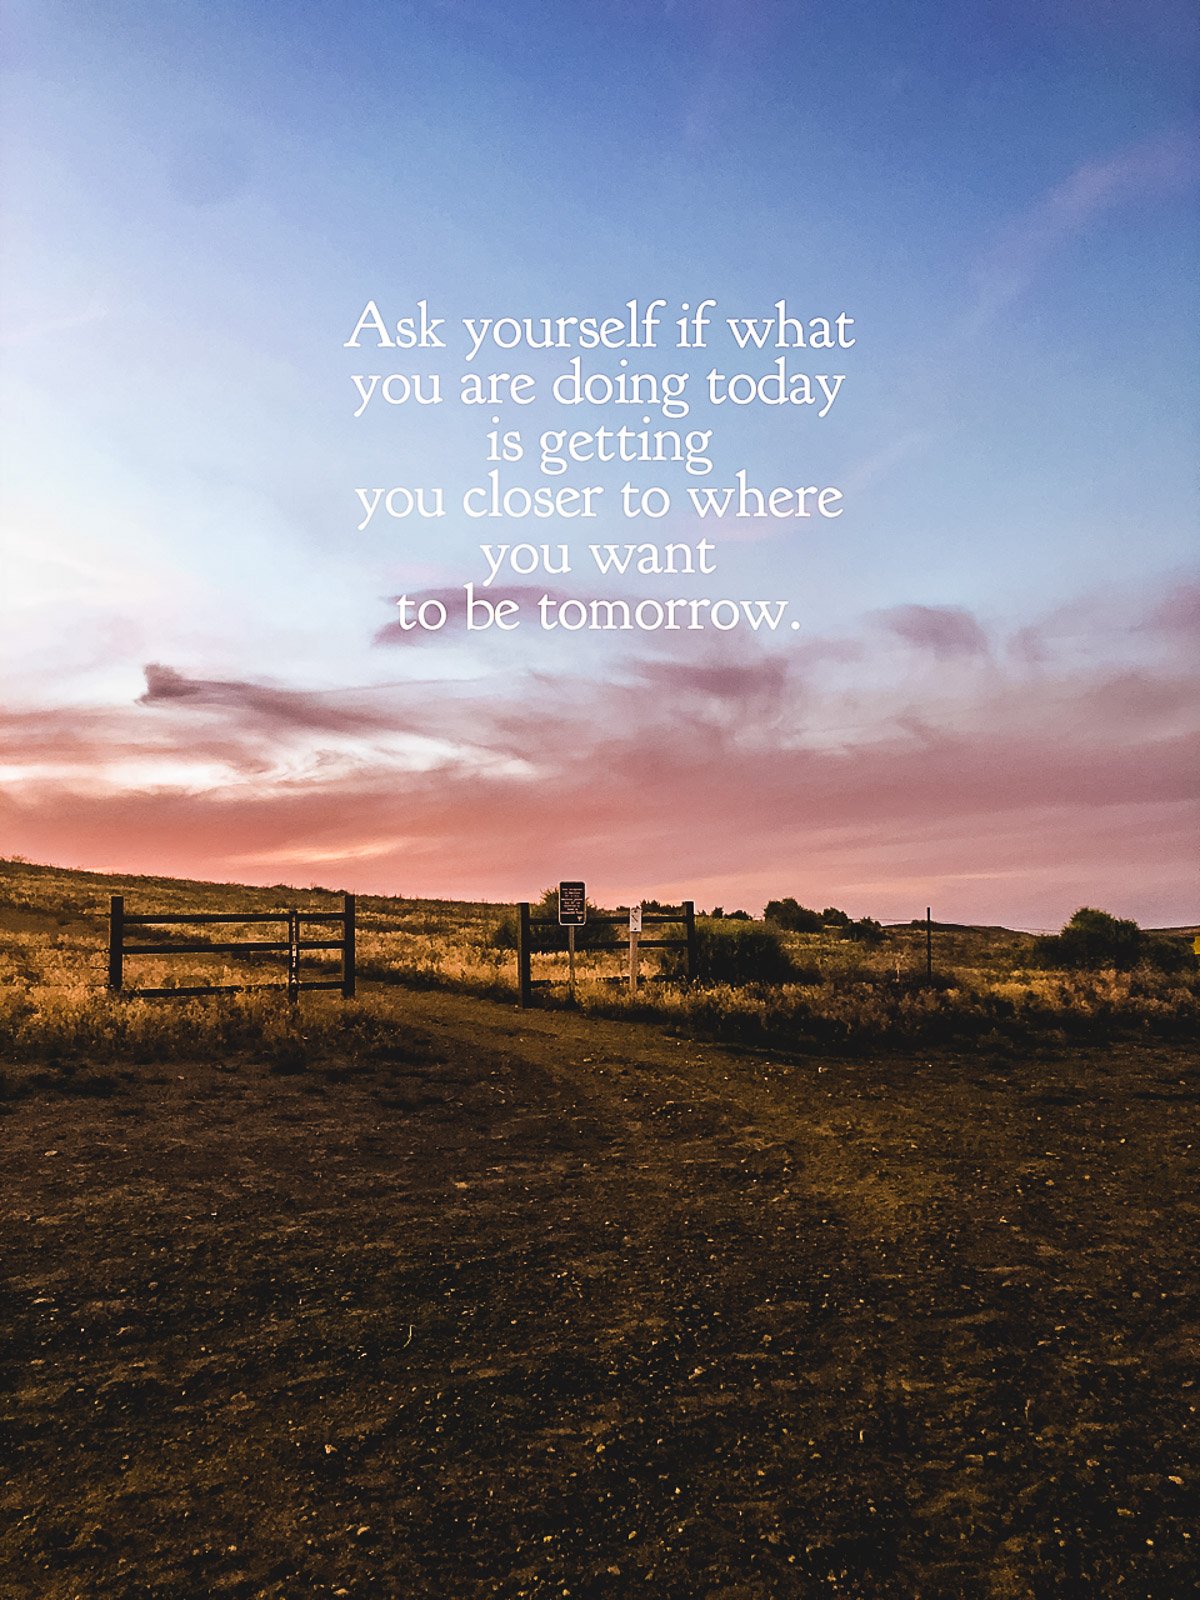 Ask yourself if what you are doing today is getting you closer to where you want to be tomorrow. 